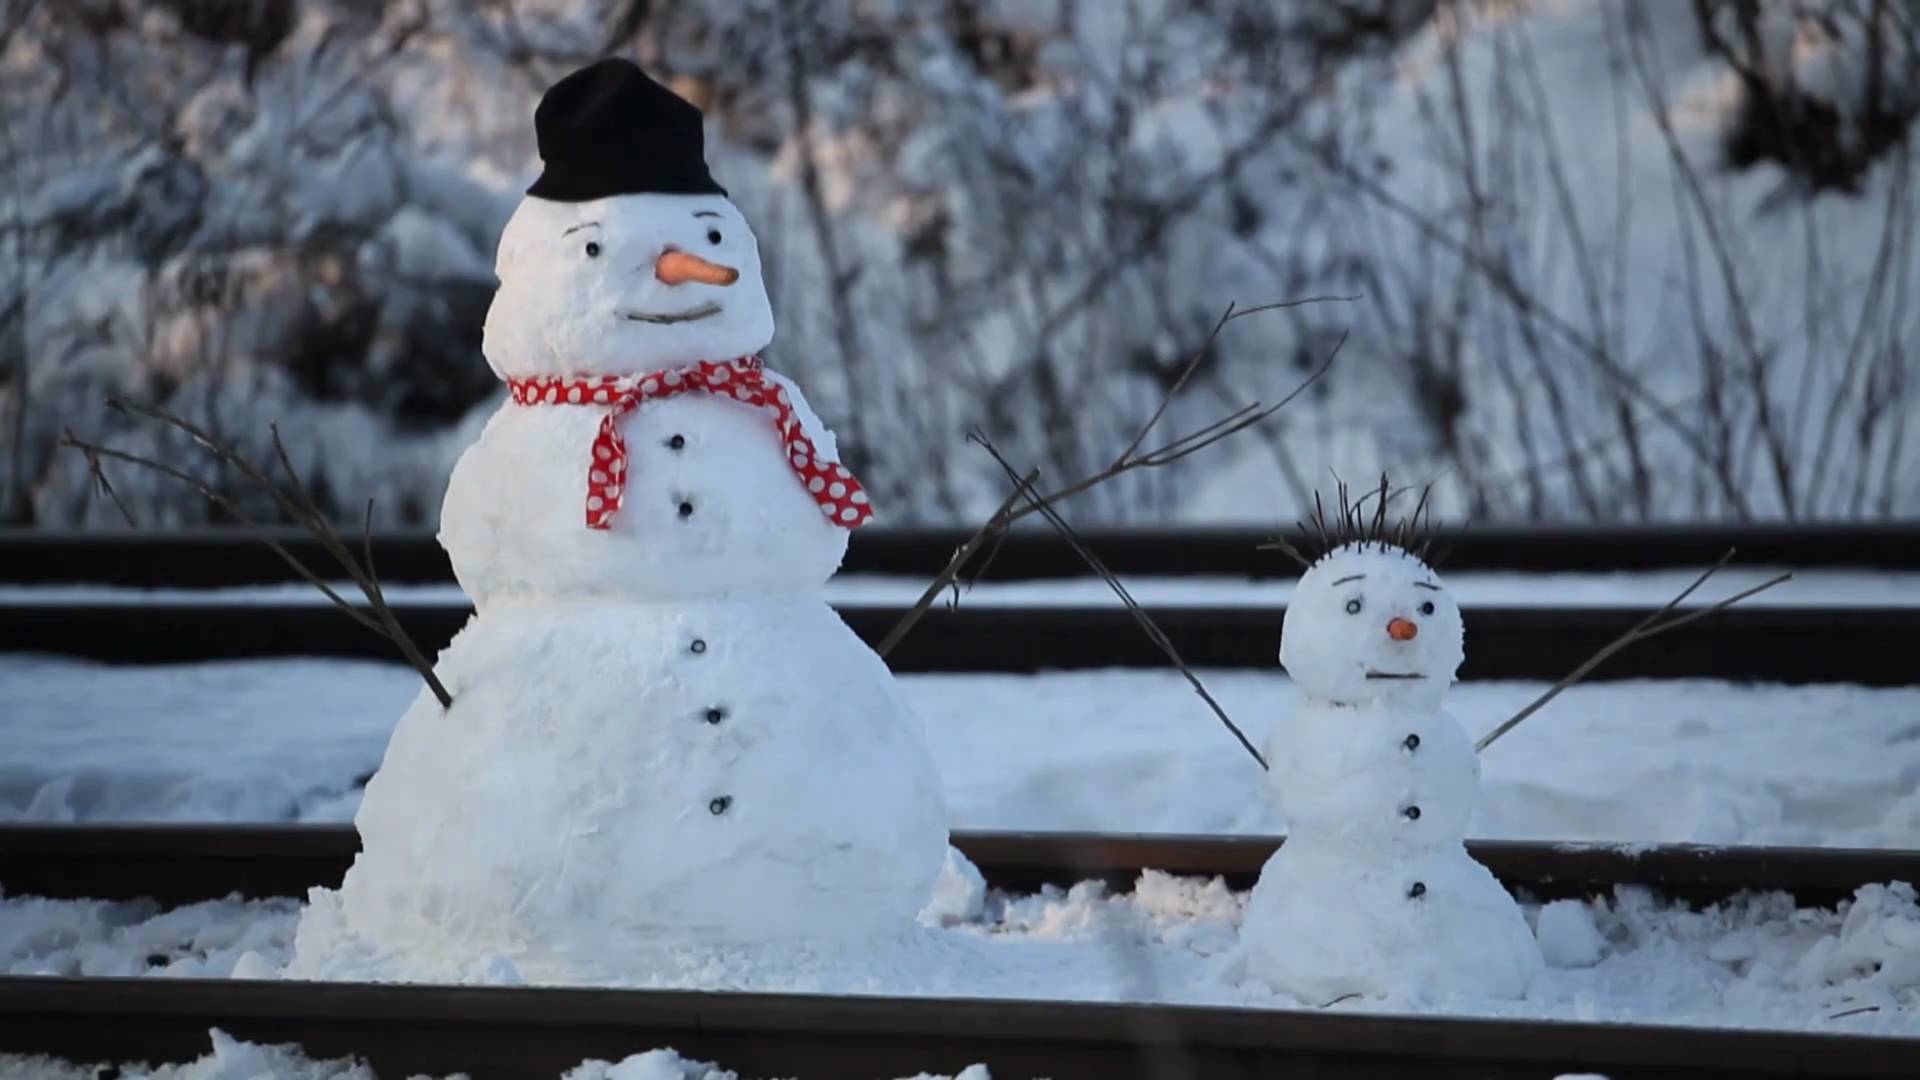 Snowman gets hit by a train - YouTube